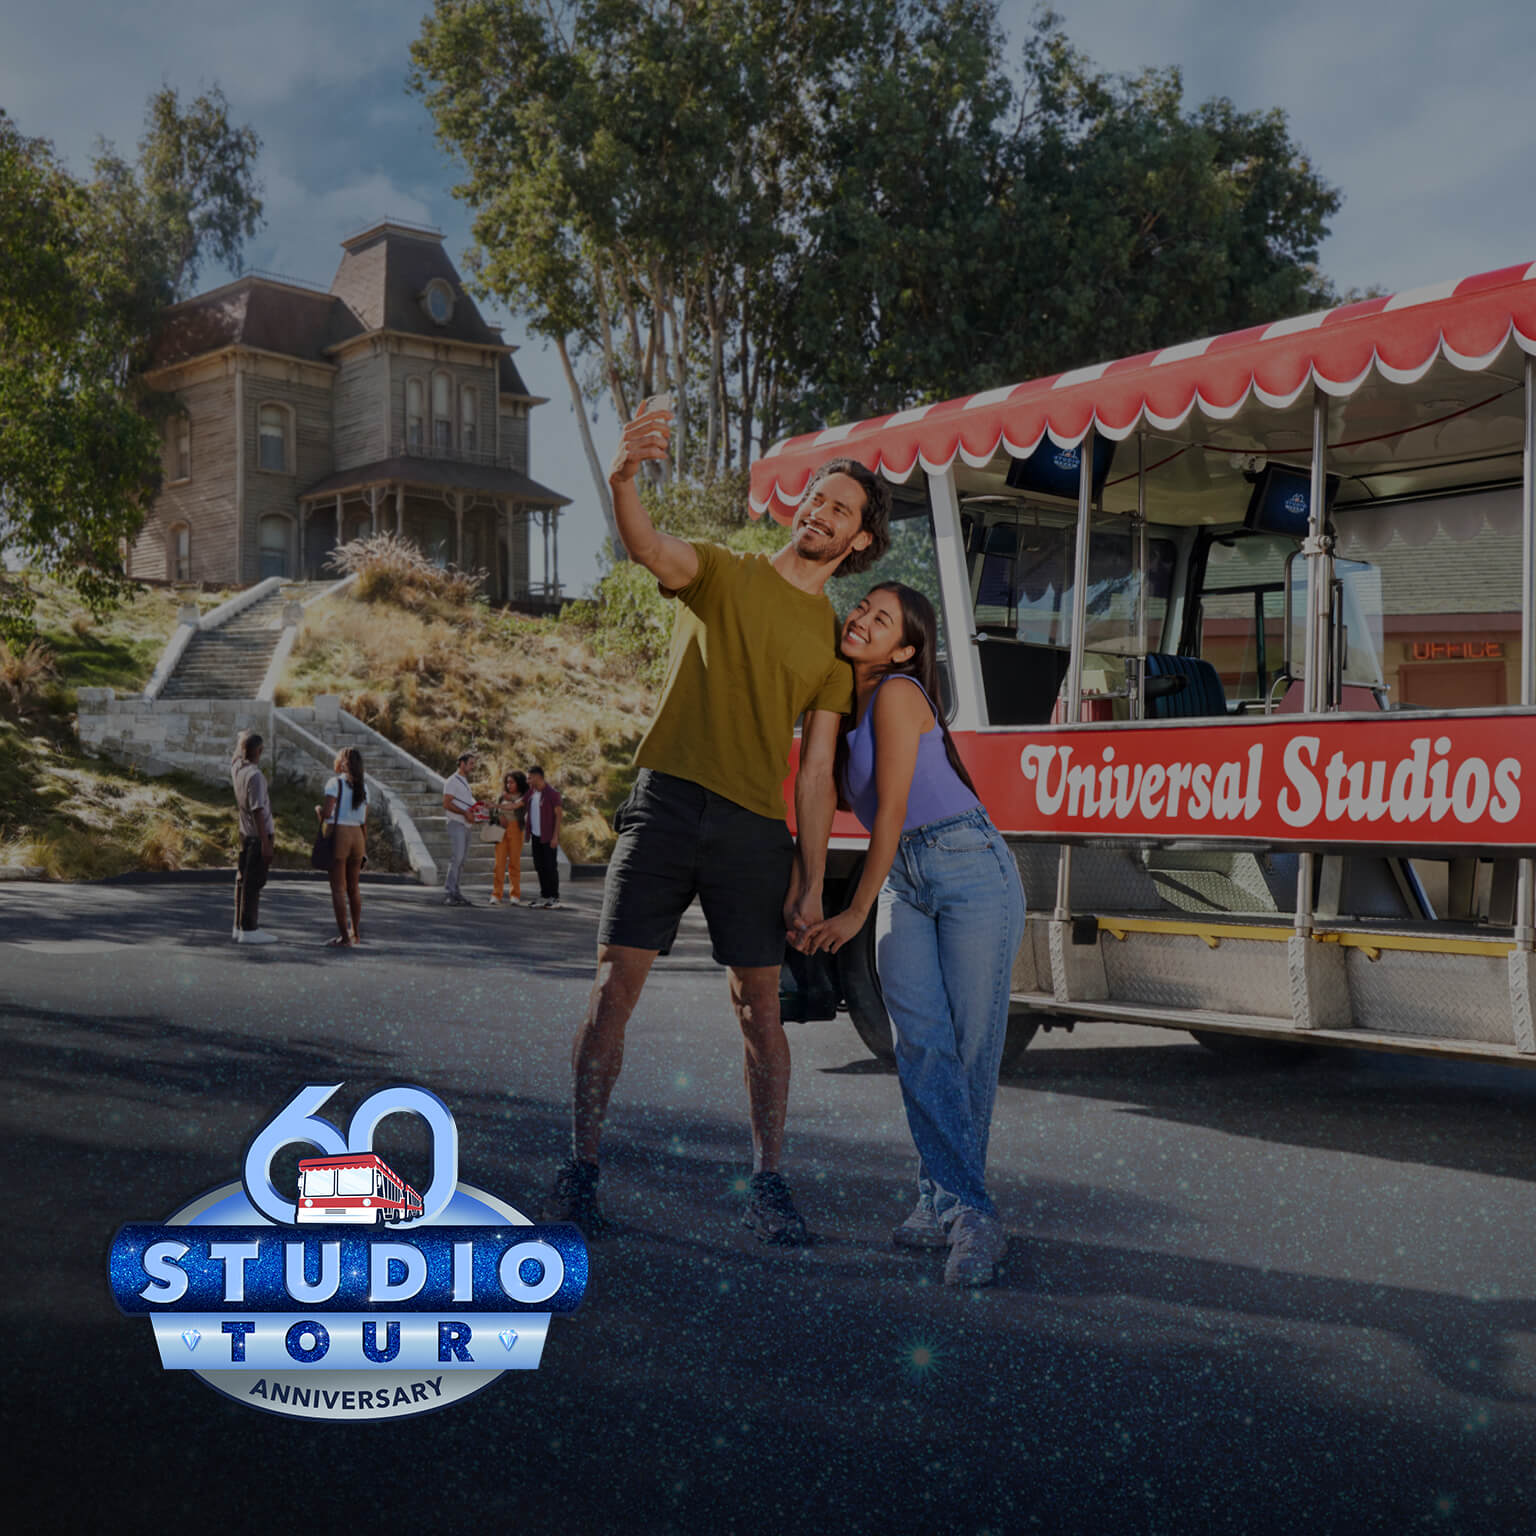 Two people take a selfie in front of the tram during Studio Tour’s 60th anniversary at Universal Studios Hollywood.